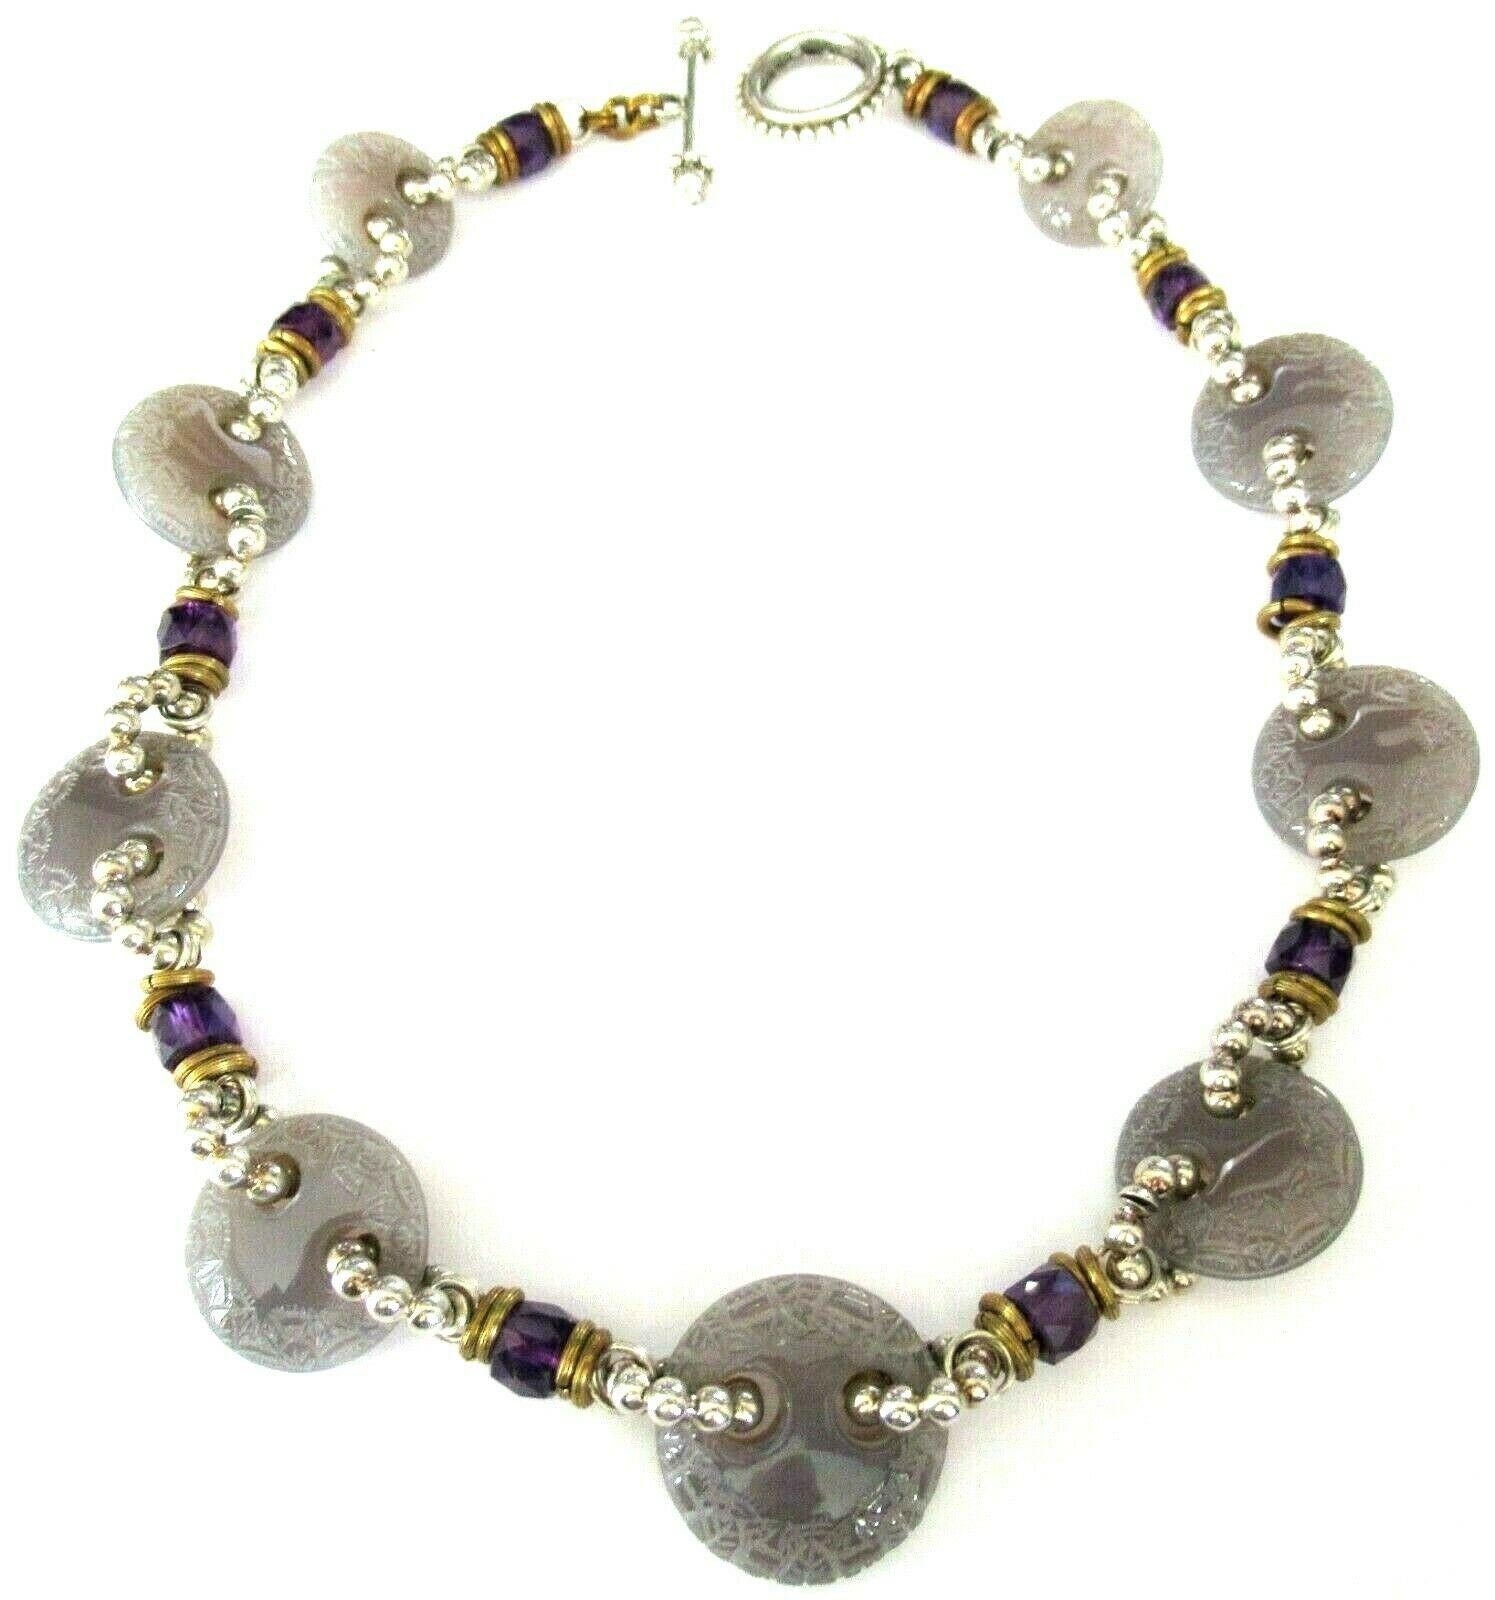 Designer Signed Stephen Dweck Genuine Amethyst Sterling Silver Necklace In Excellent Condition For Sale In Montreal, QC